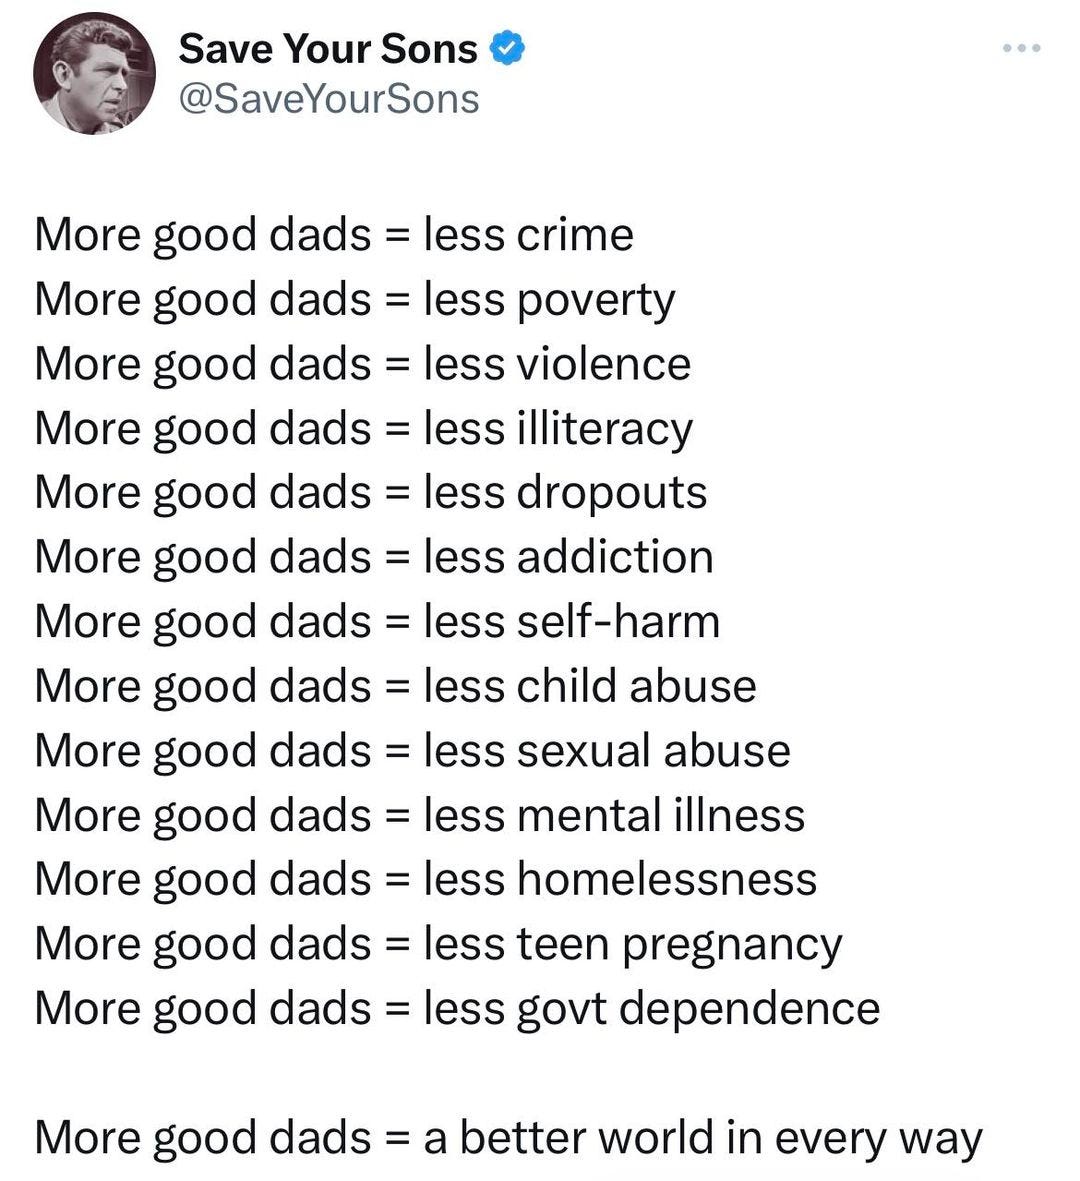 May be an image of 1 person and text that says 'Save Your Sons @SaveYourSons More good dads = less crime More good dads less poverty More good dads= less violence More good dads less illiteracy More good dads less dropouts More good dads less addiction More good .as= less self-harm More good dads less child abuse More good dads= less sexual abuse More good dads less mental illness More good dads= less homelessness More good das= less teen pregnancy More good dads = less govt dependence More good dads a better world in every way'